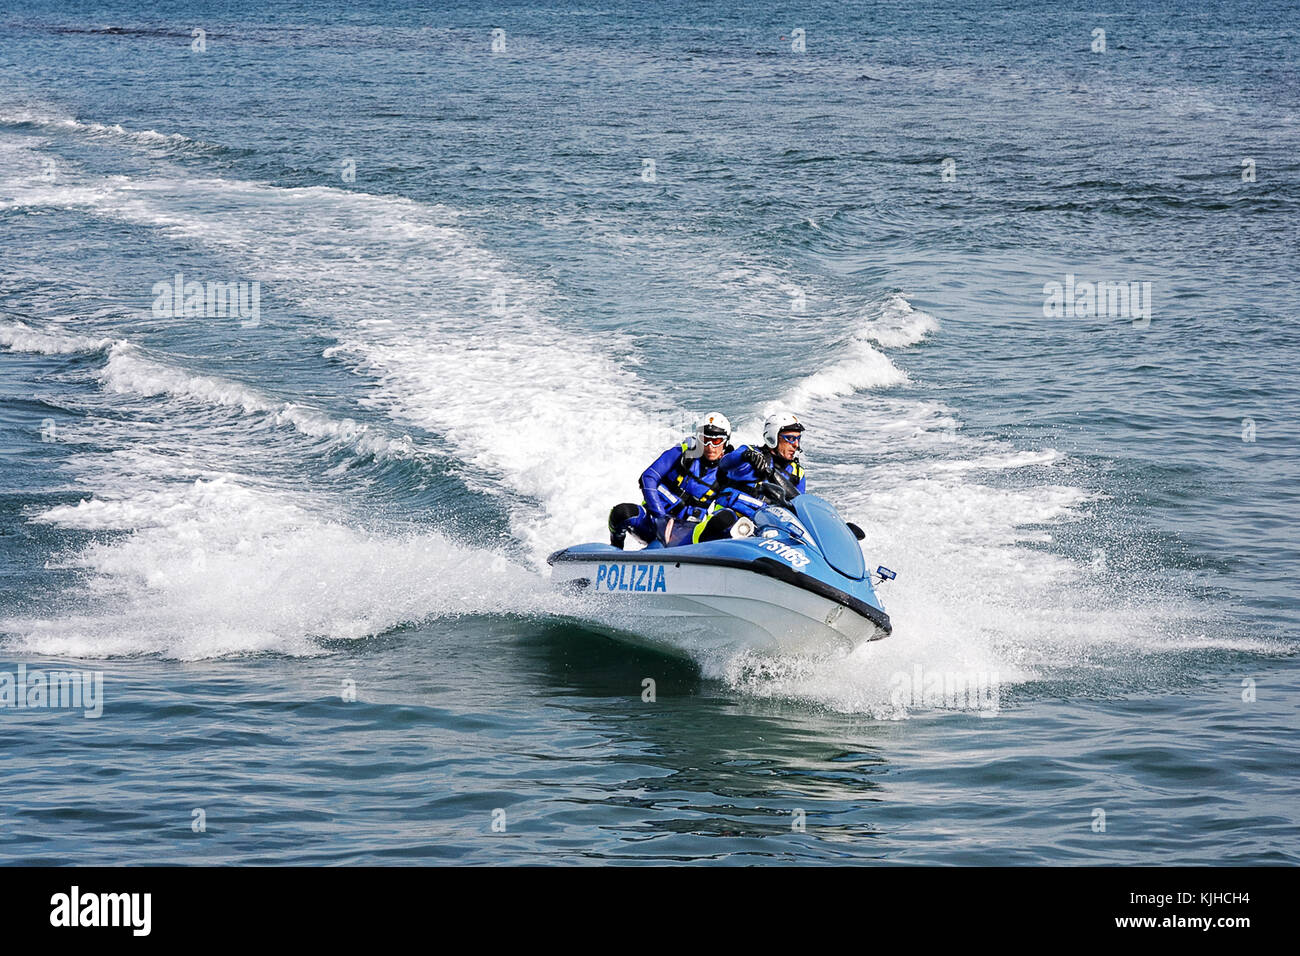 Rome, Italy - May 9, 2009: Maritime police agents, special police department of Italy, train at sea with waterbodies, in a public exercise during the  Stock Photo